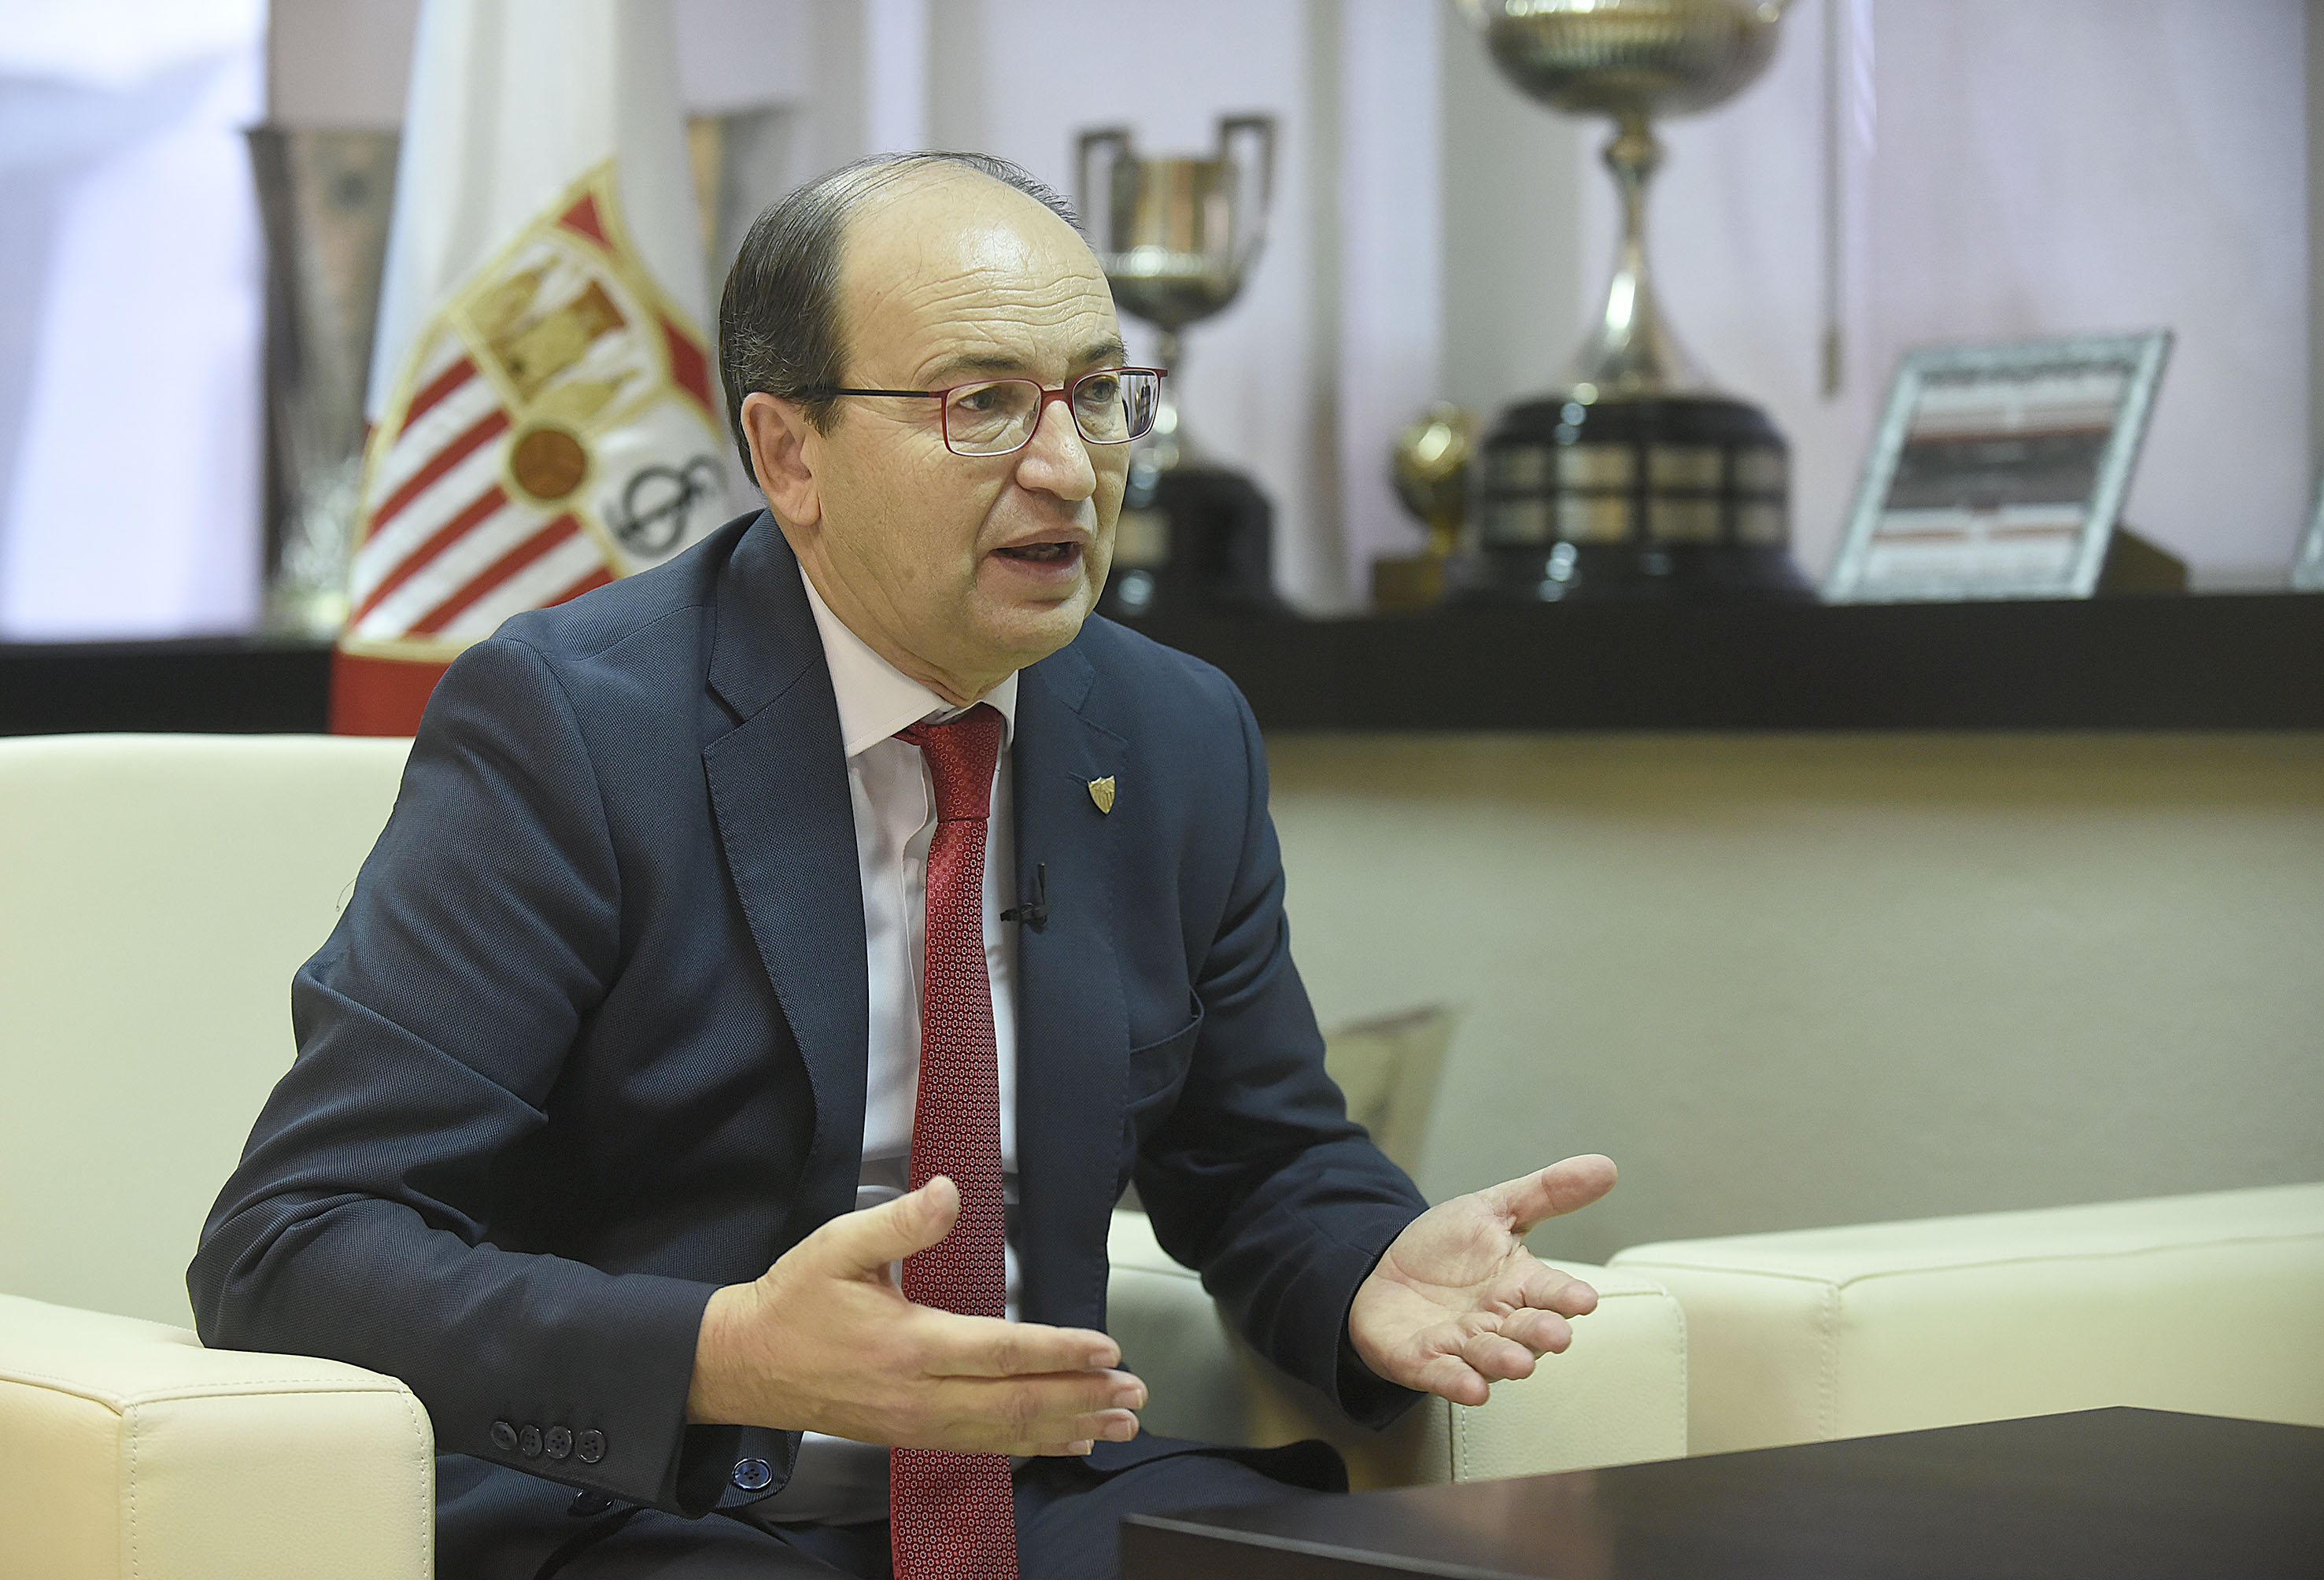 The president José Castro in an interview